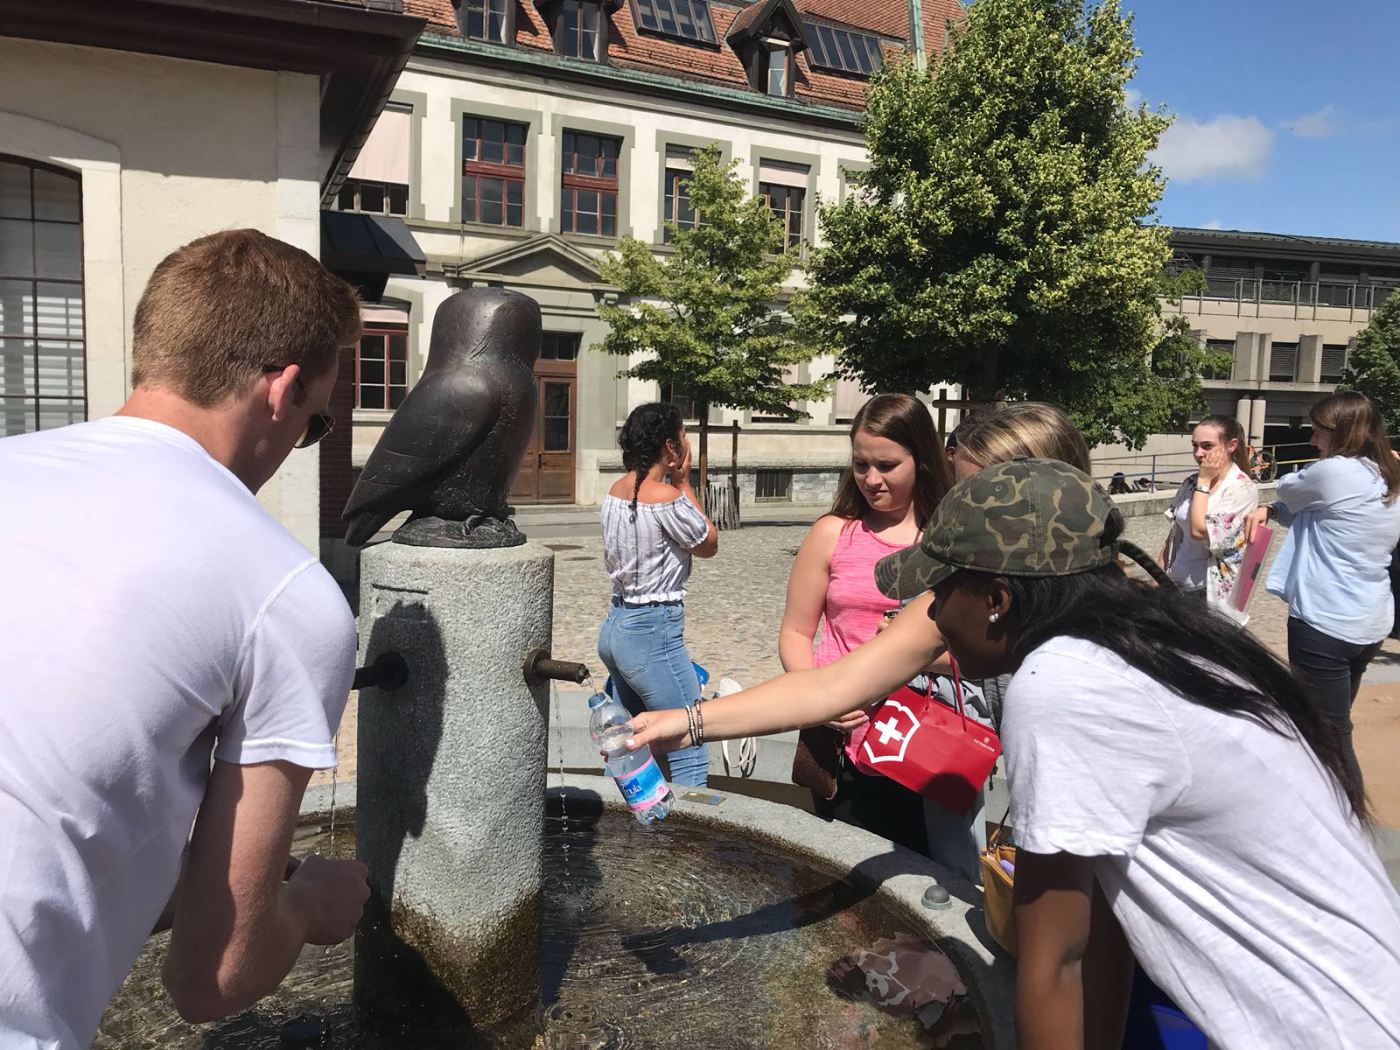 Symone and the group fill up at a fountain.